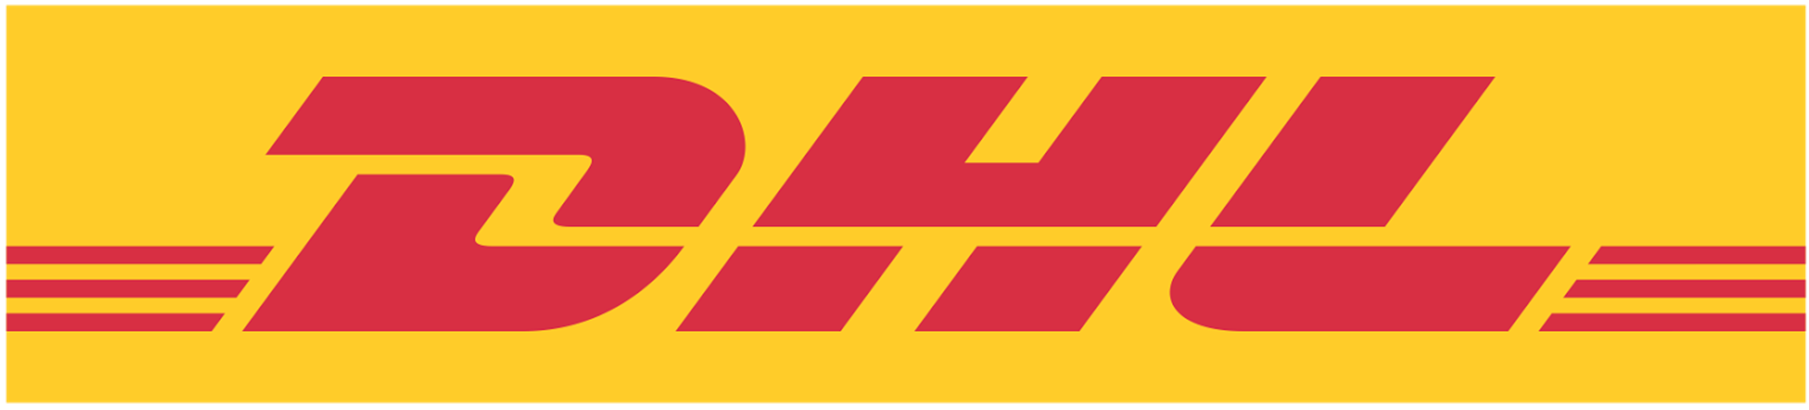 DHL Servicepoint zoeker